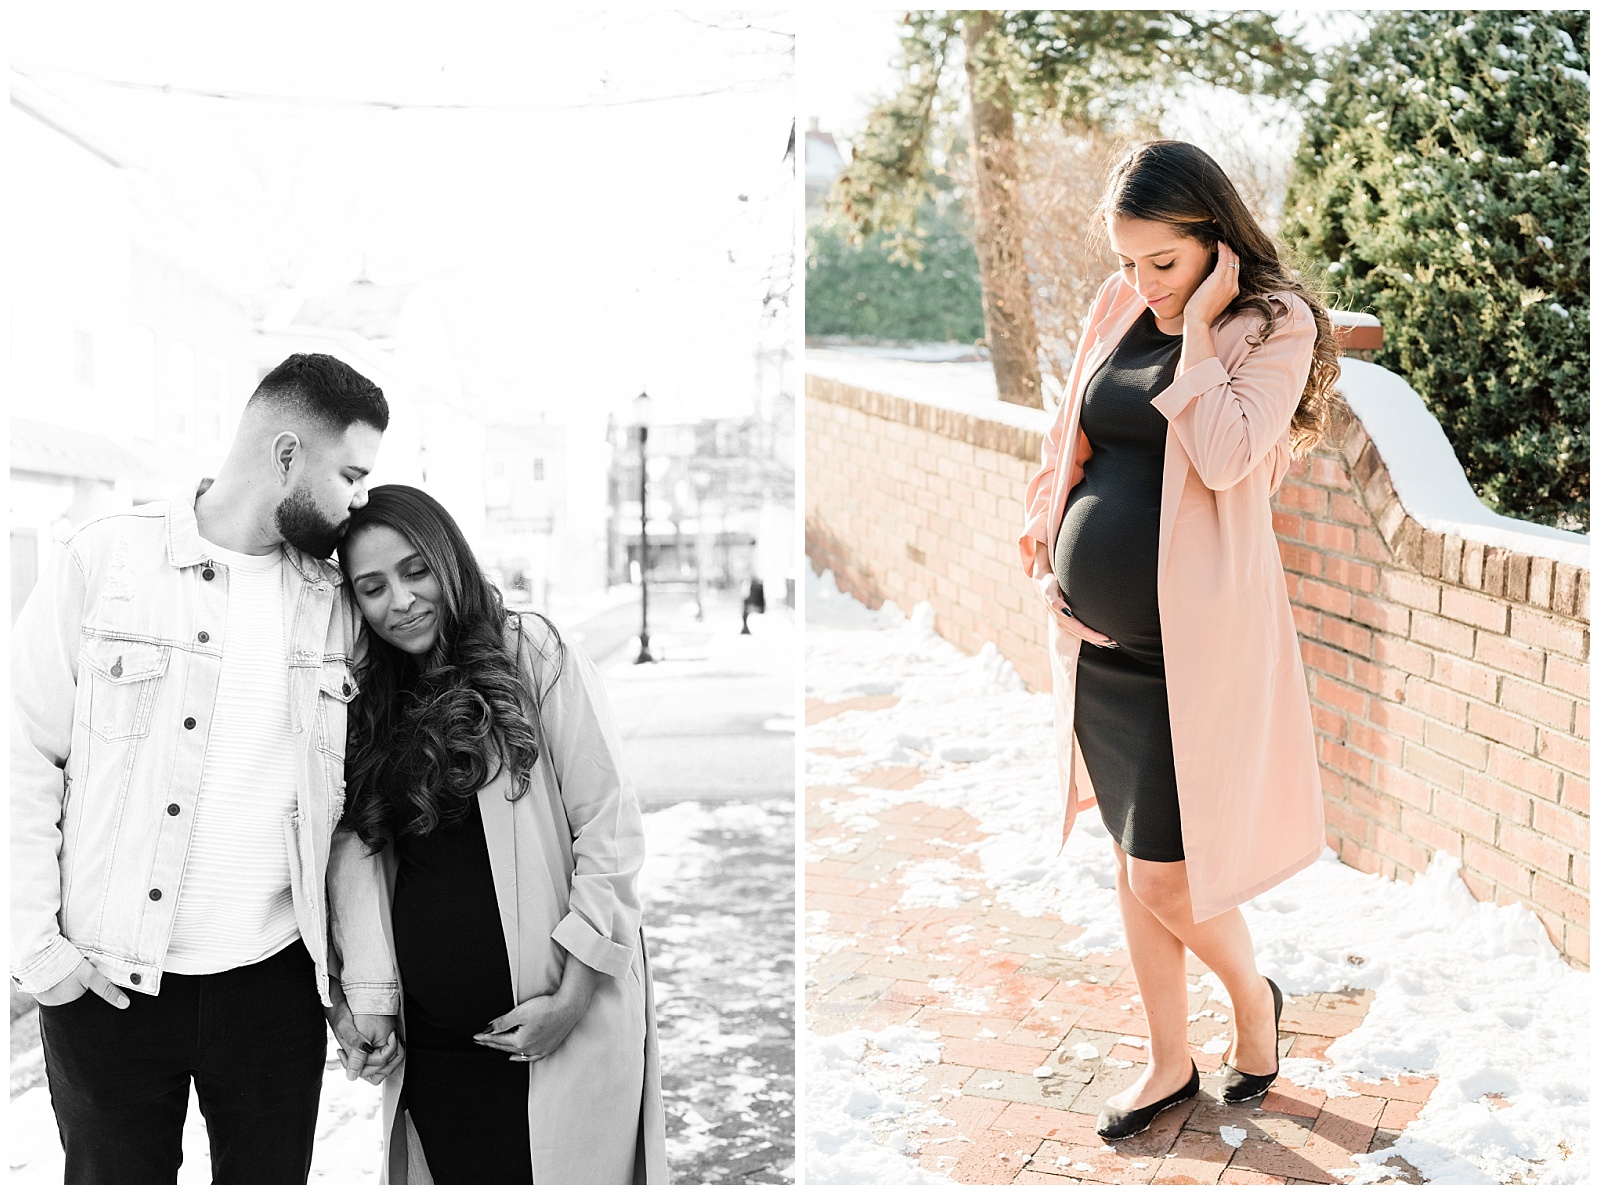 Maternity Session, Family, Baby, New Parents, Maternity Shoot, Pregnant, Pregnancy Photos, New Jersey, Photographer, Haddonfield, NJ, Haddon Heights, Town, Snowy, Winter,